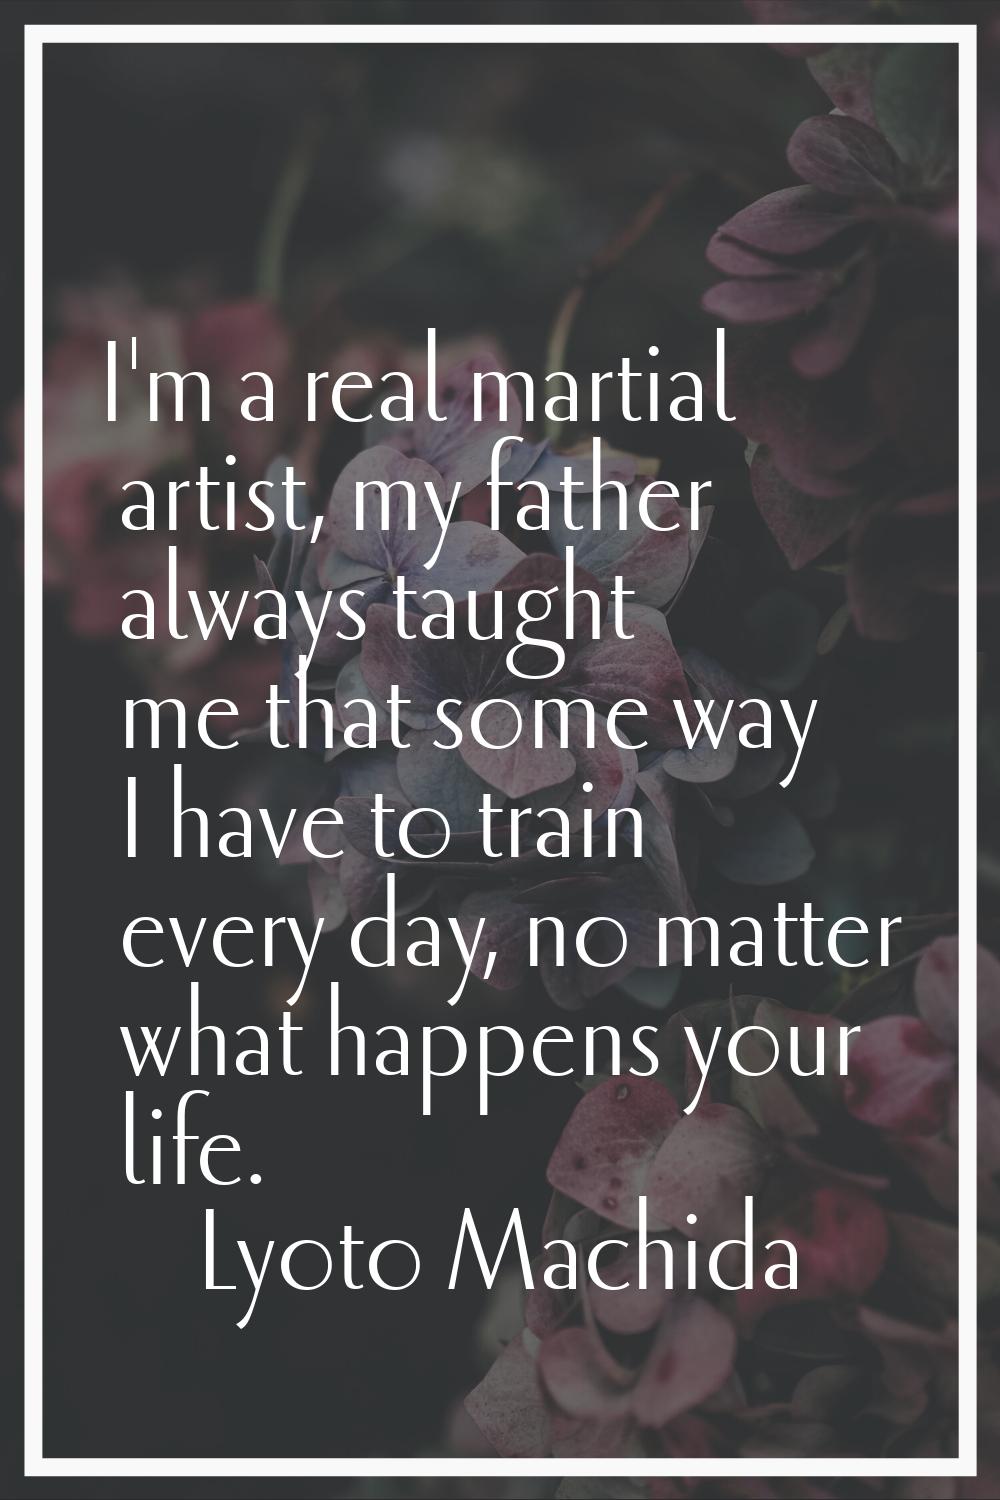 I'm a real martial artist, my father always taught me that some way I have to train every day, no m